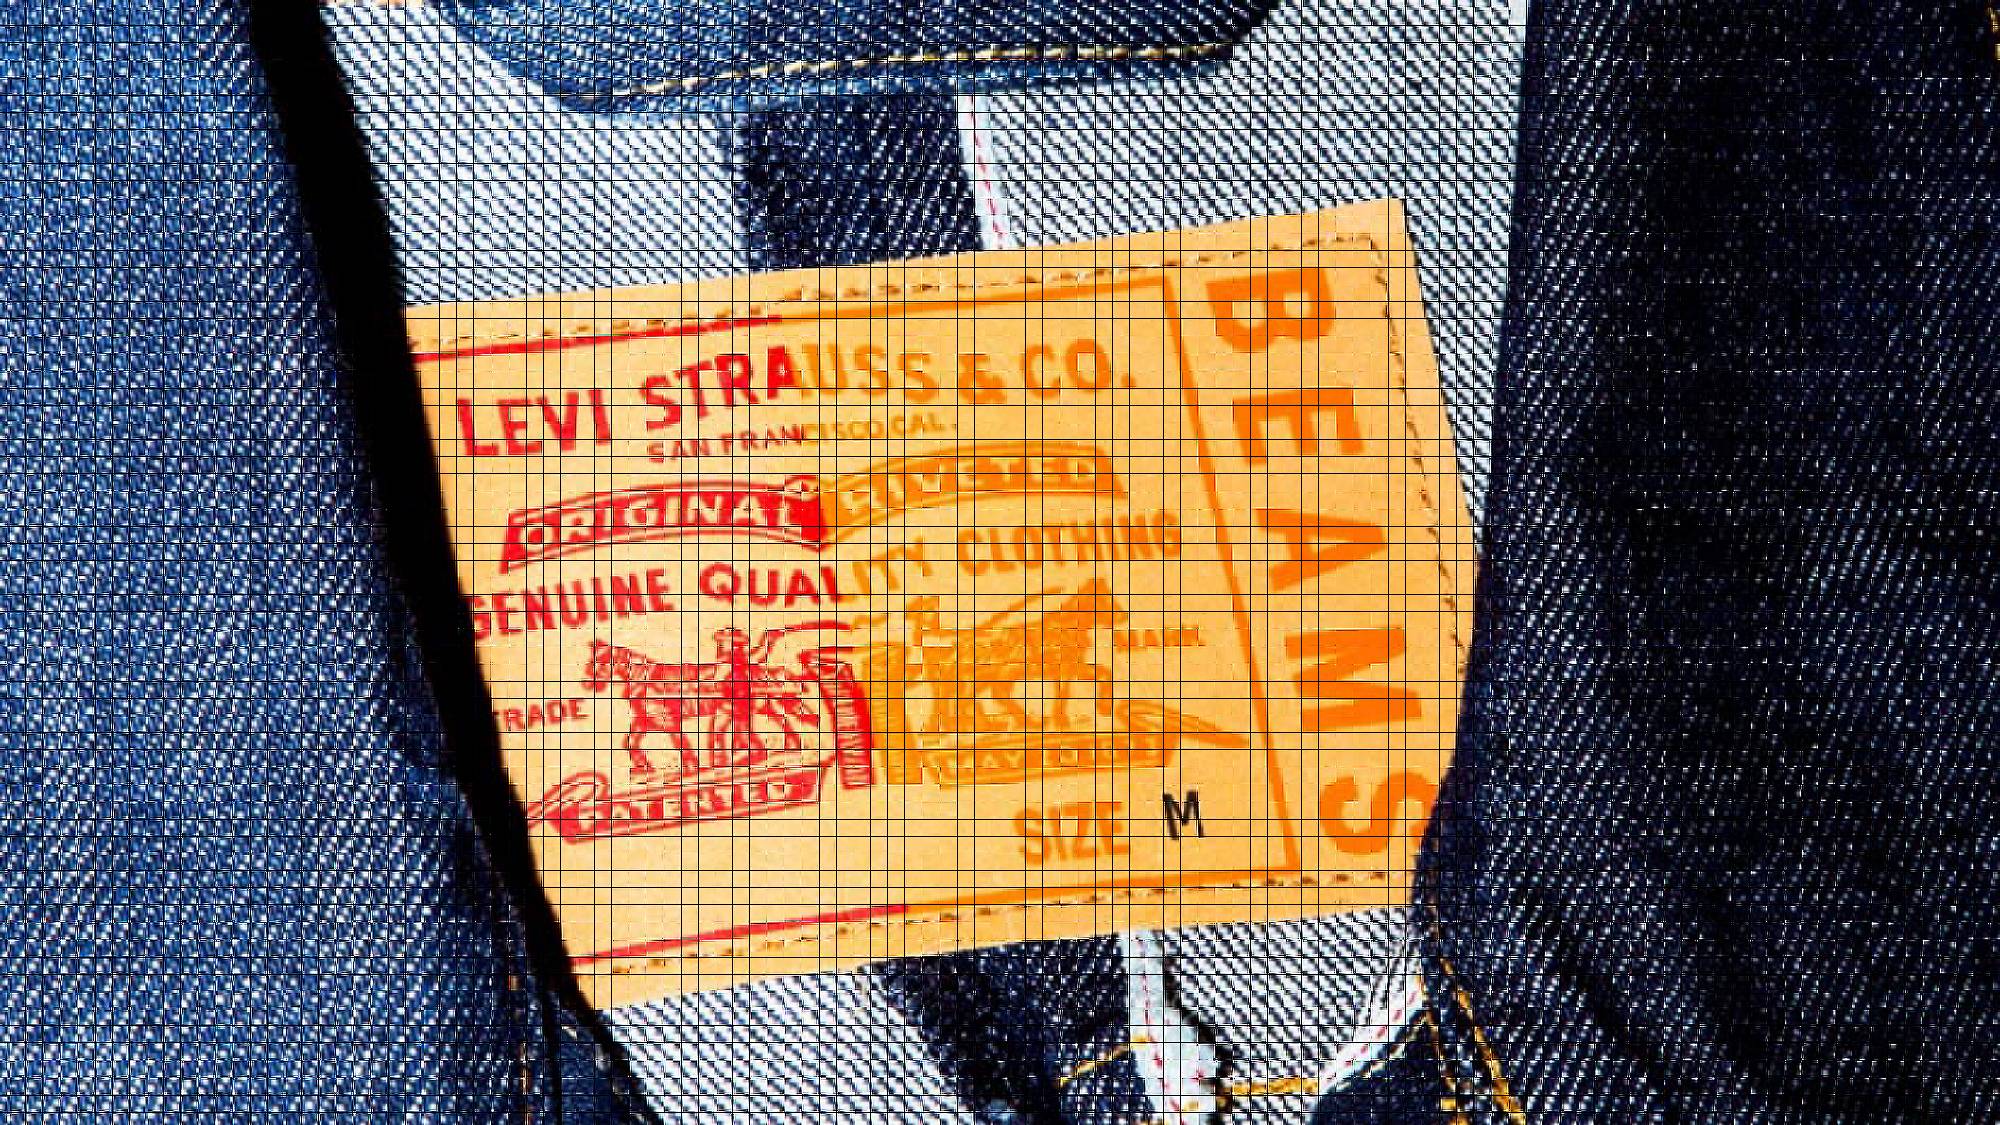 Blog Header with Levi's tag.